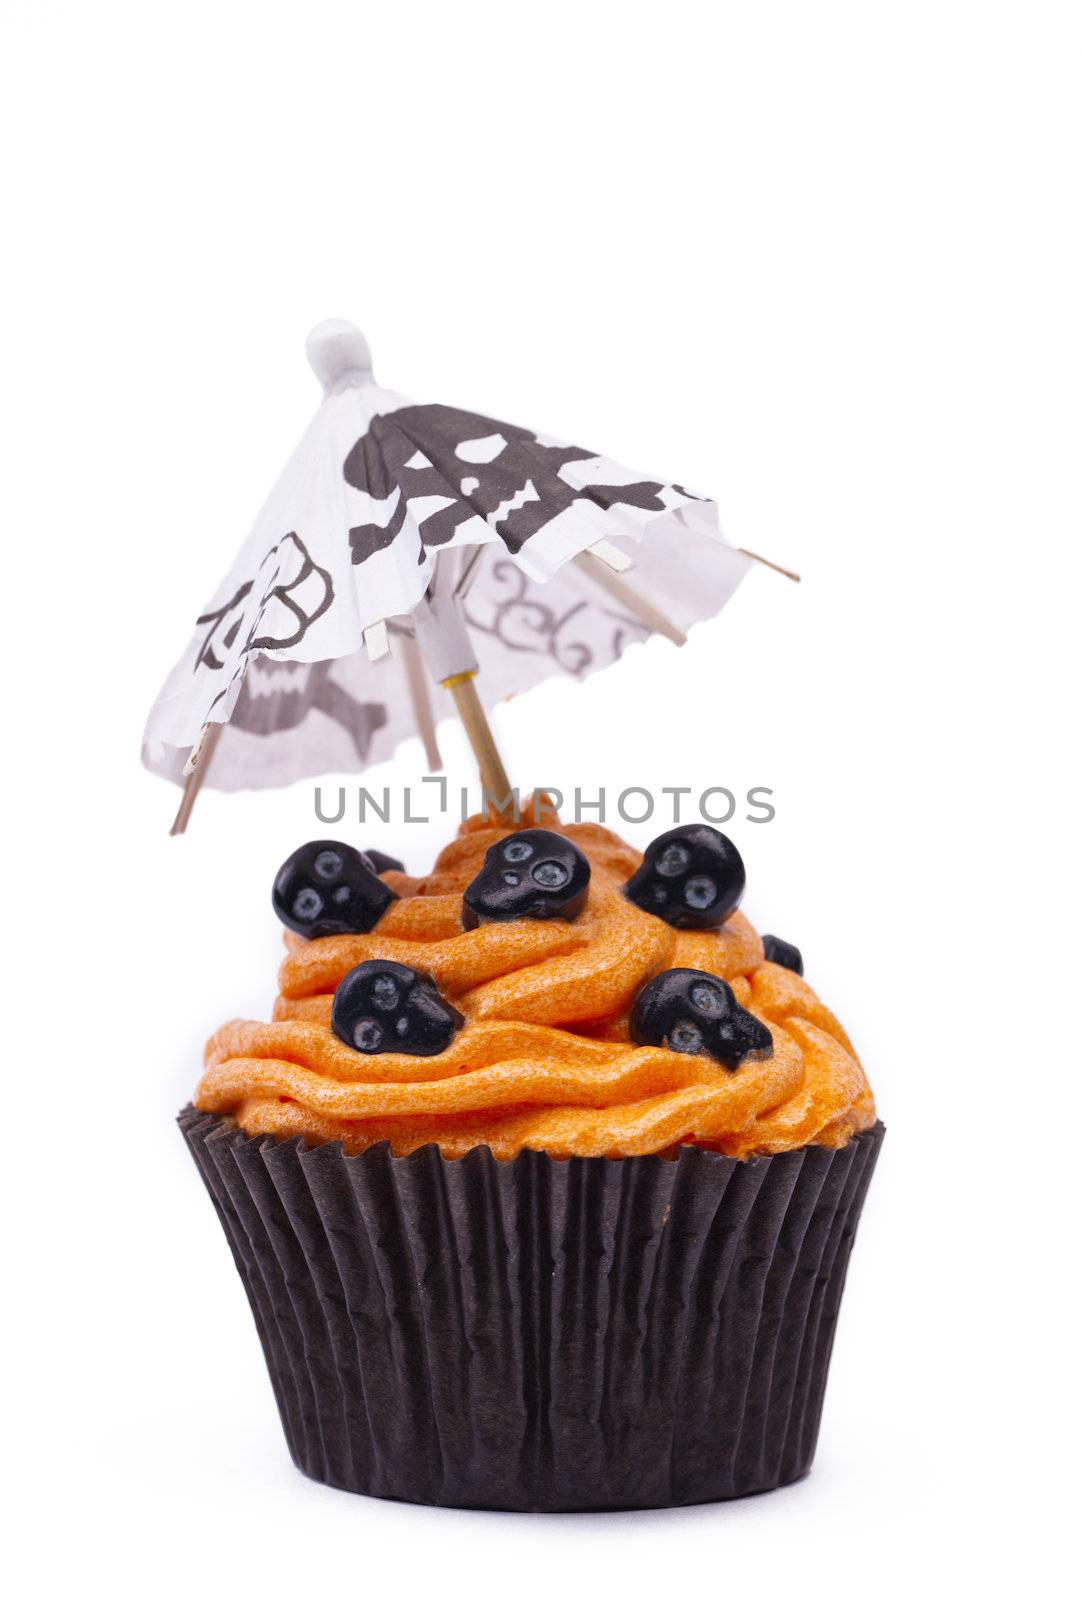 Close-up image of a orange cupcake with skull topping and canopy with skull design over white background.